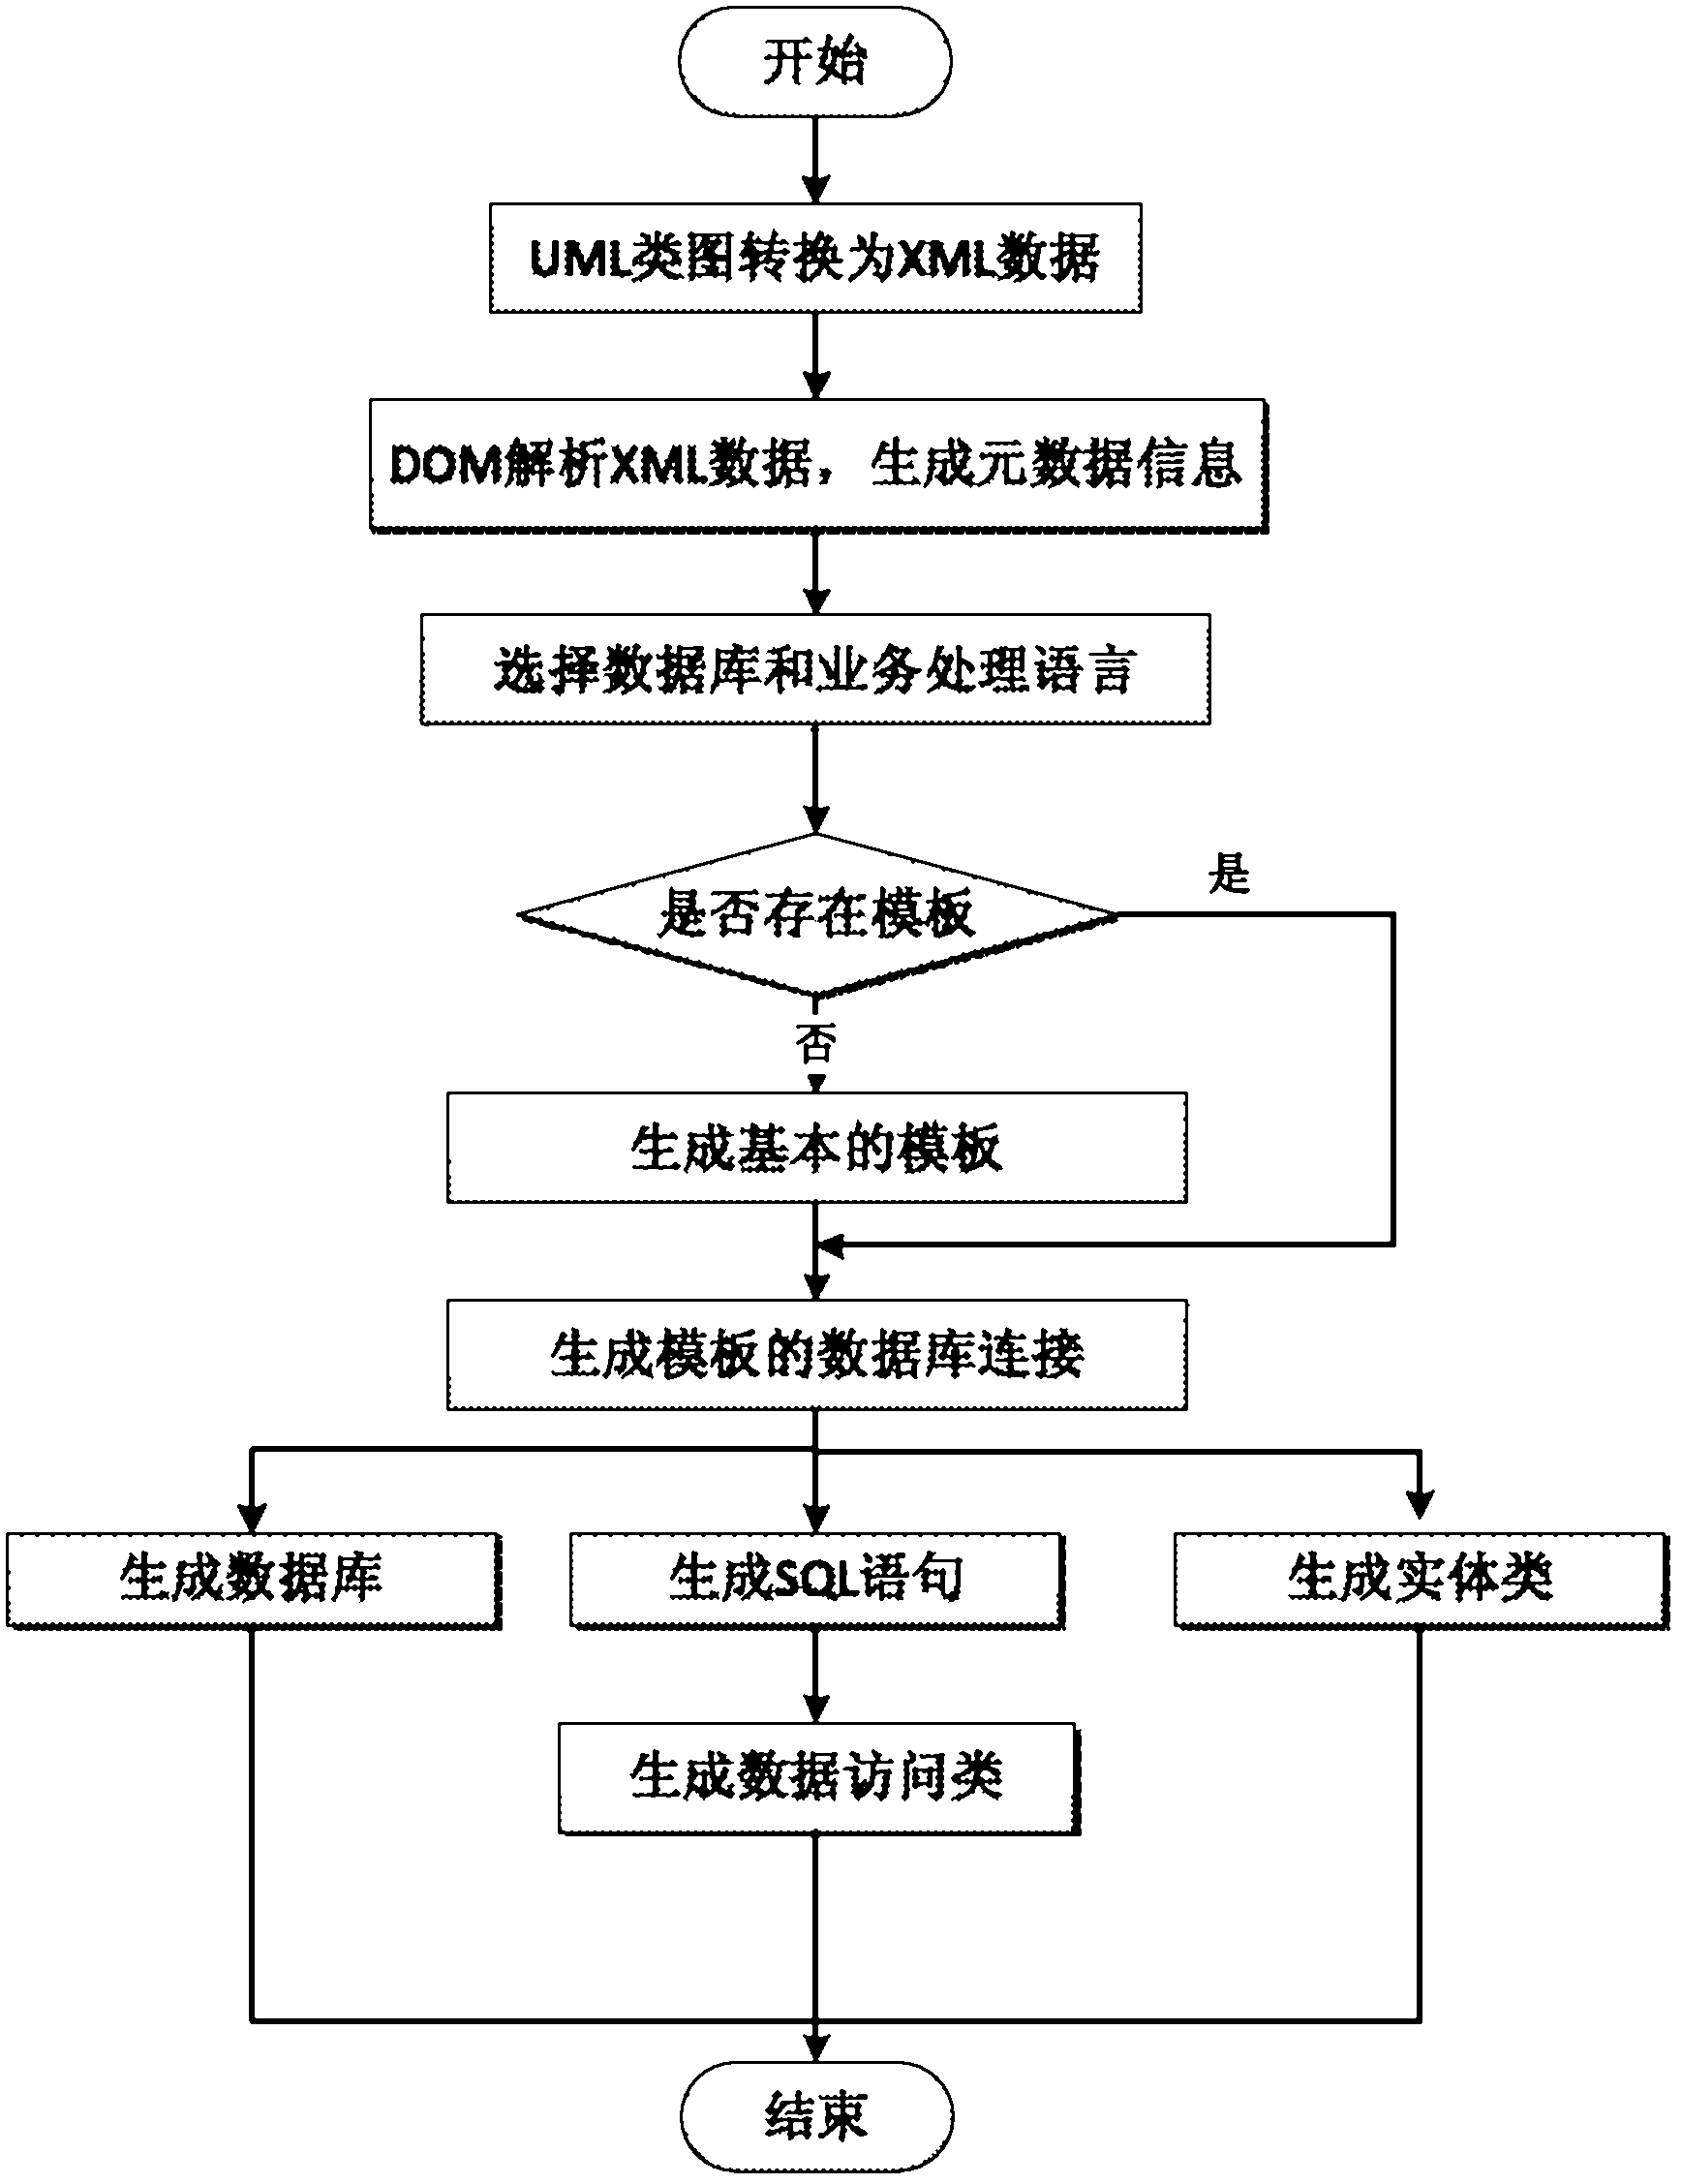 Configurable method for automatically generating database and accessing data